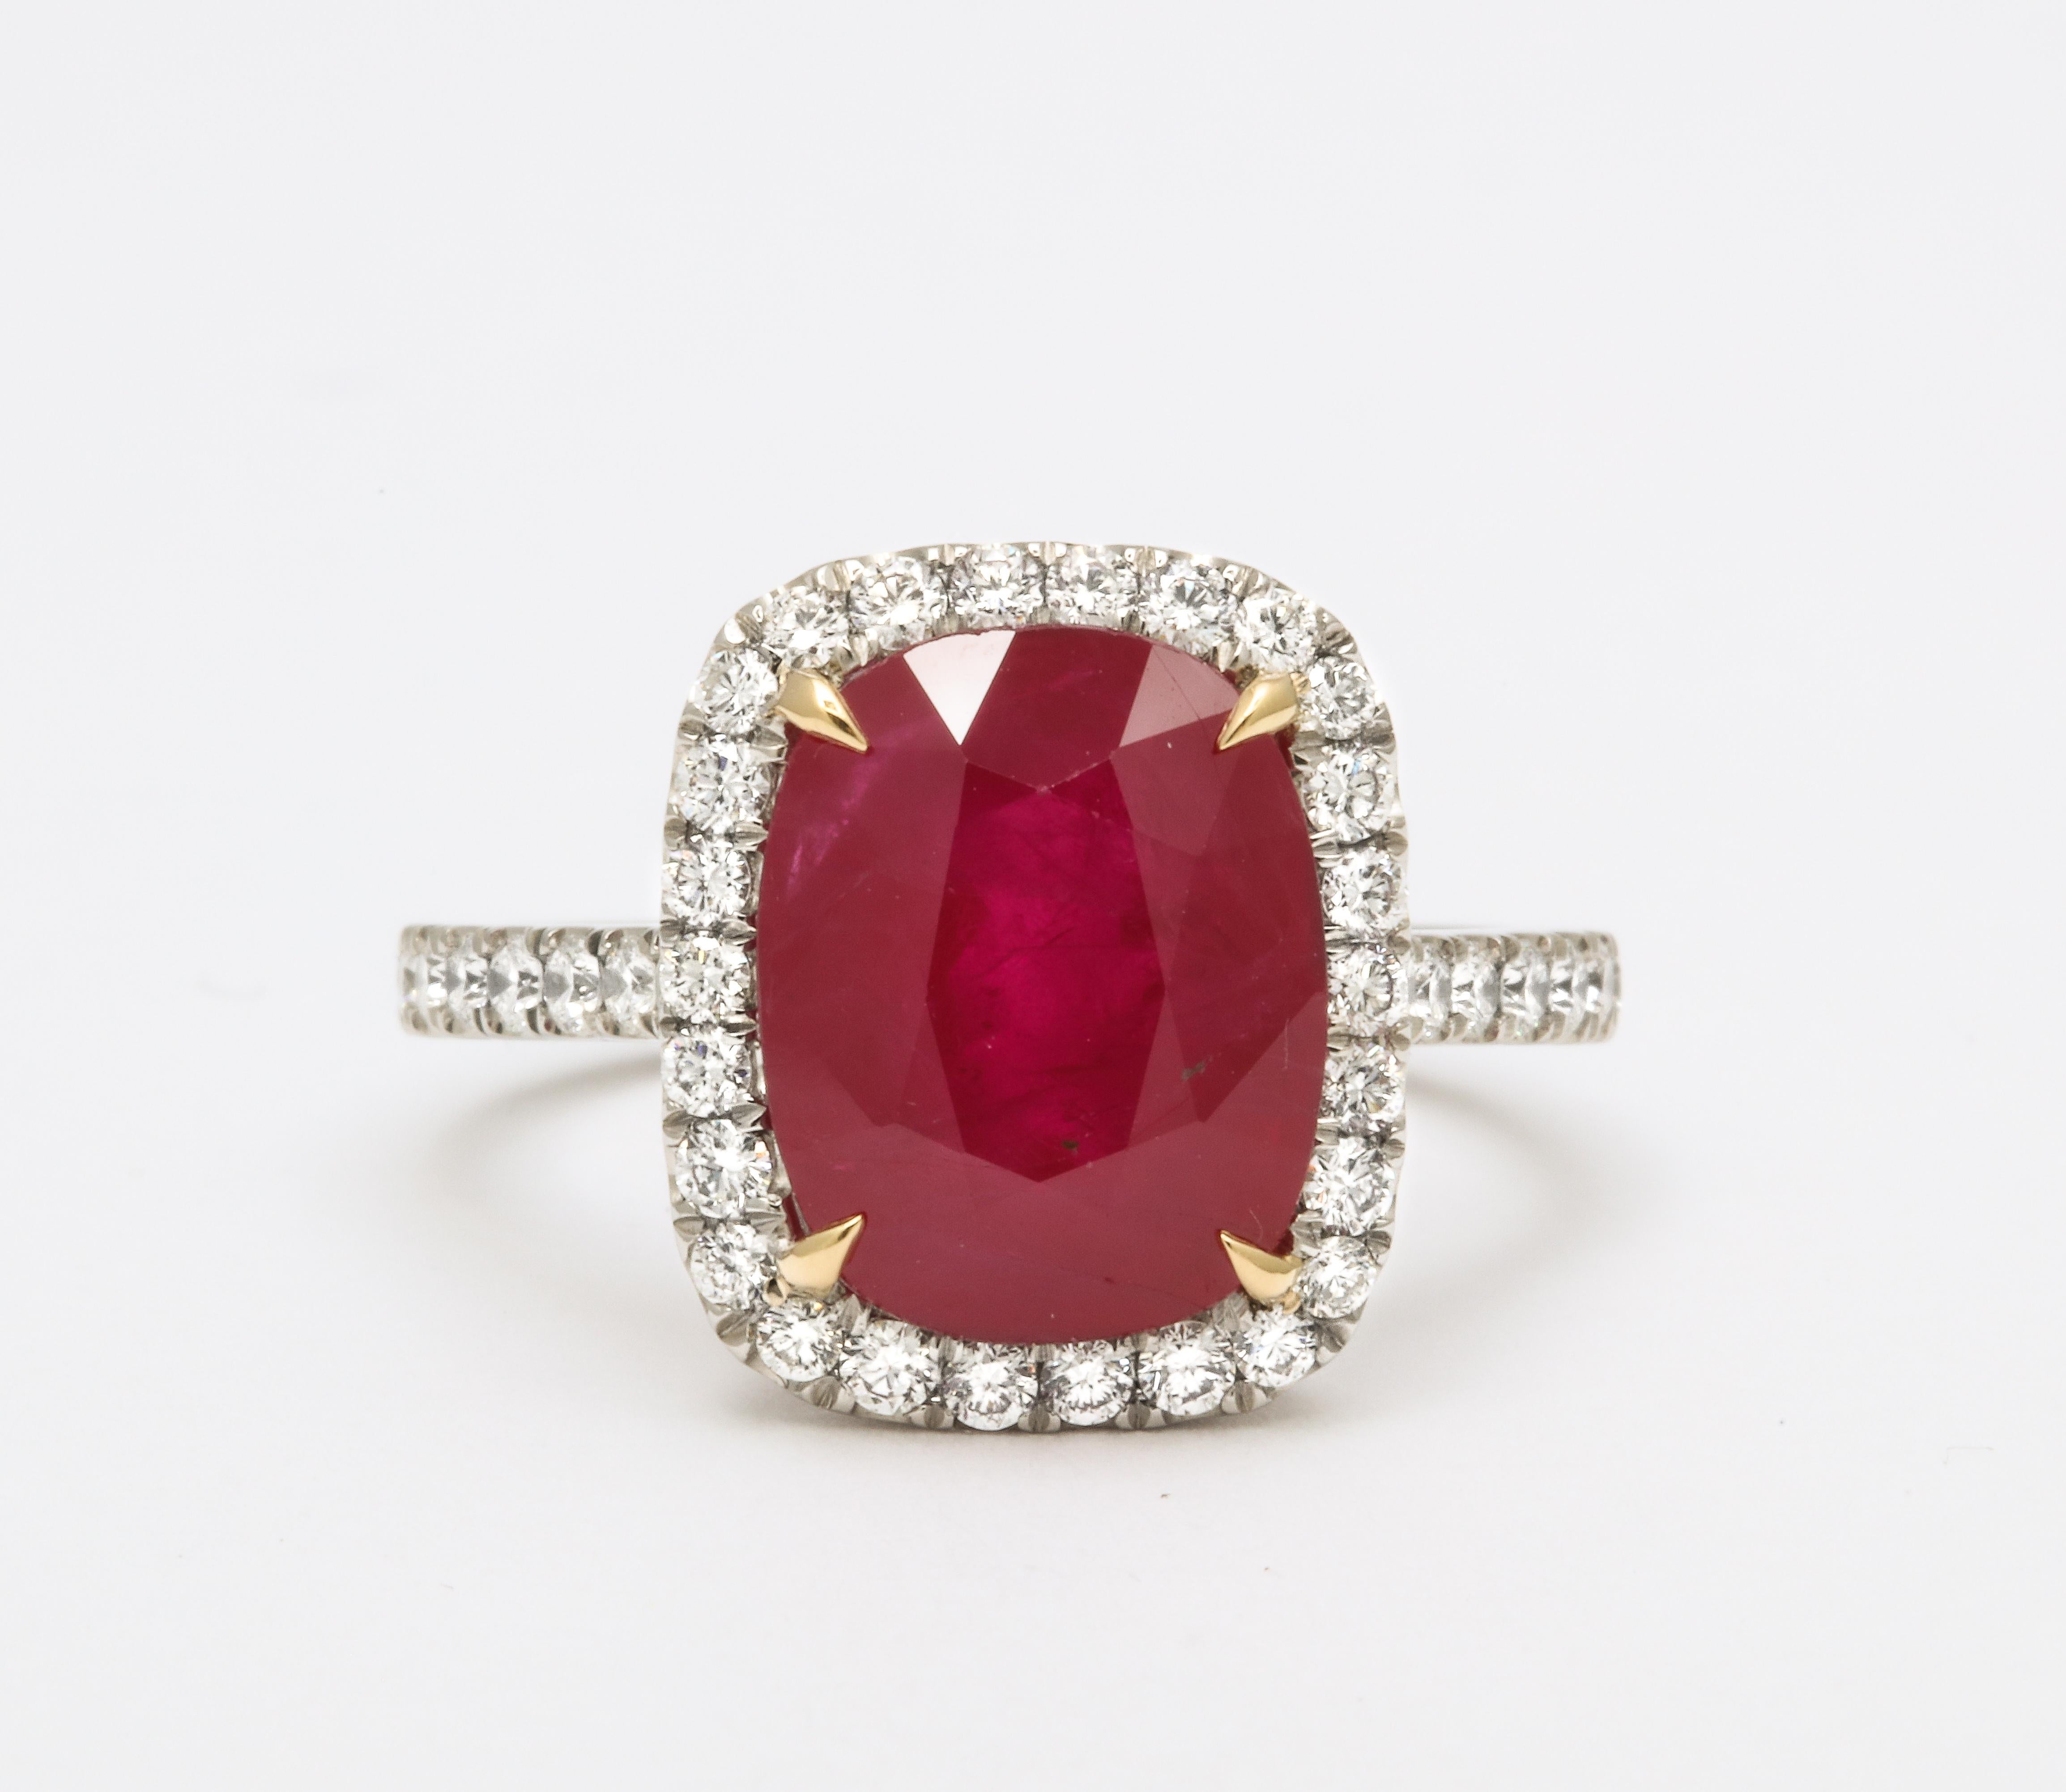 A fine Ruby set in a wearable custom made diamond mounting. 

5.77 carat Cushion cut “Intense Red” Burma Ruby set in a custom made diamond mounting. 

.78 carats of white round brilliant cut diamonds set in platinum. 

Currently a size 6.5, this